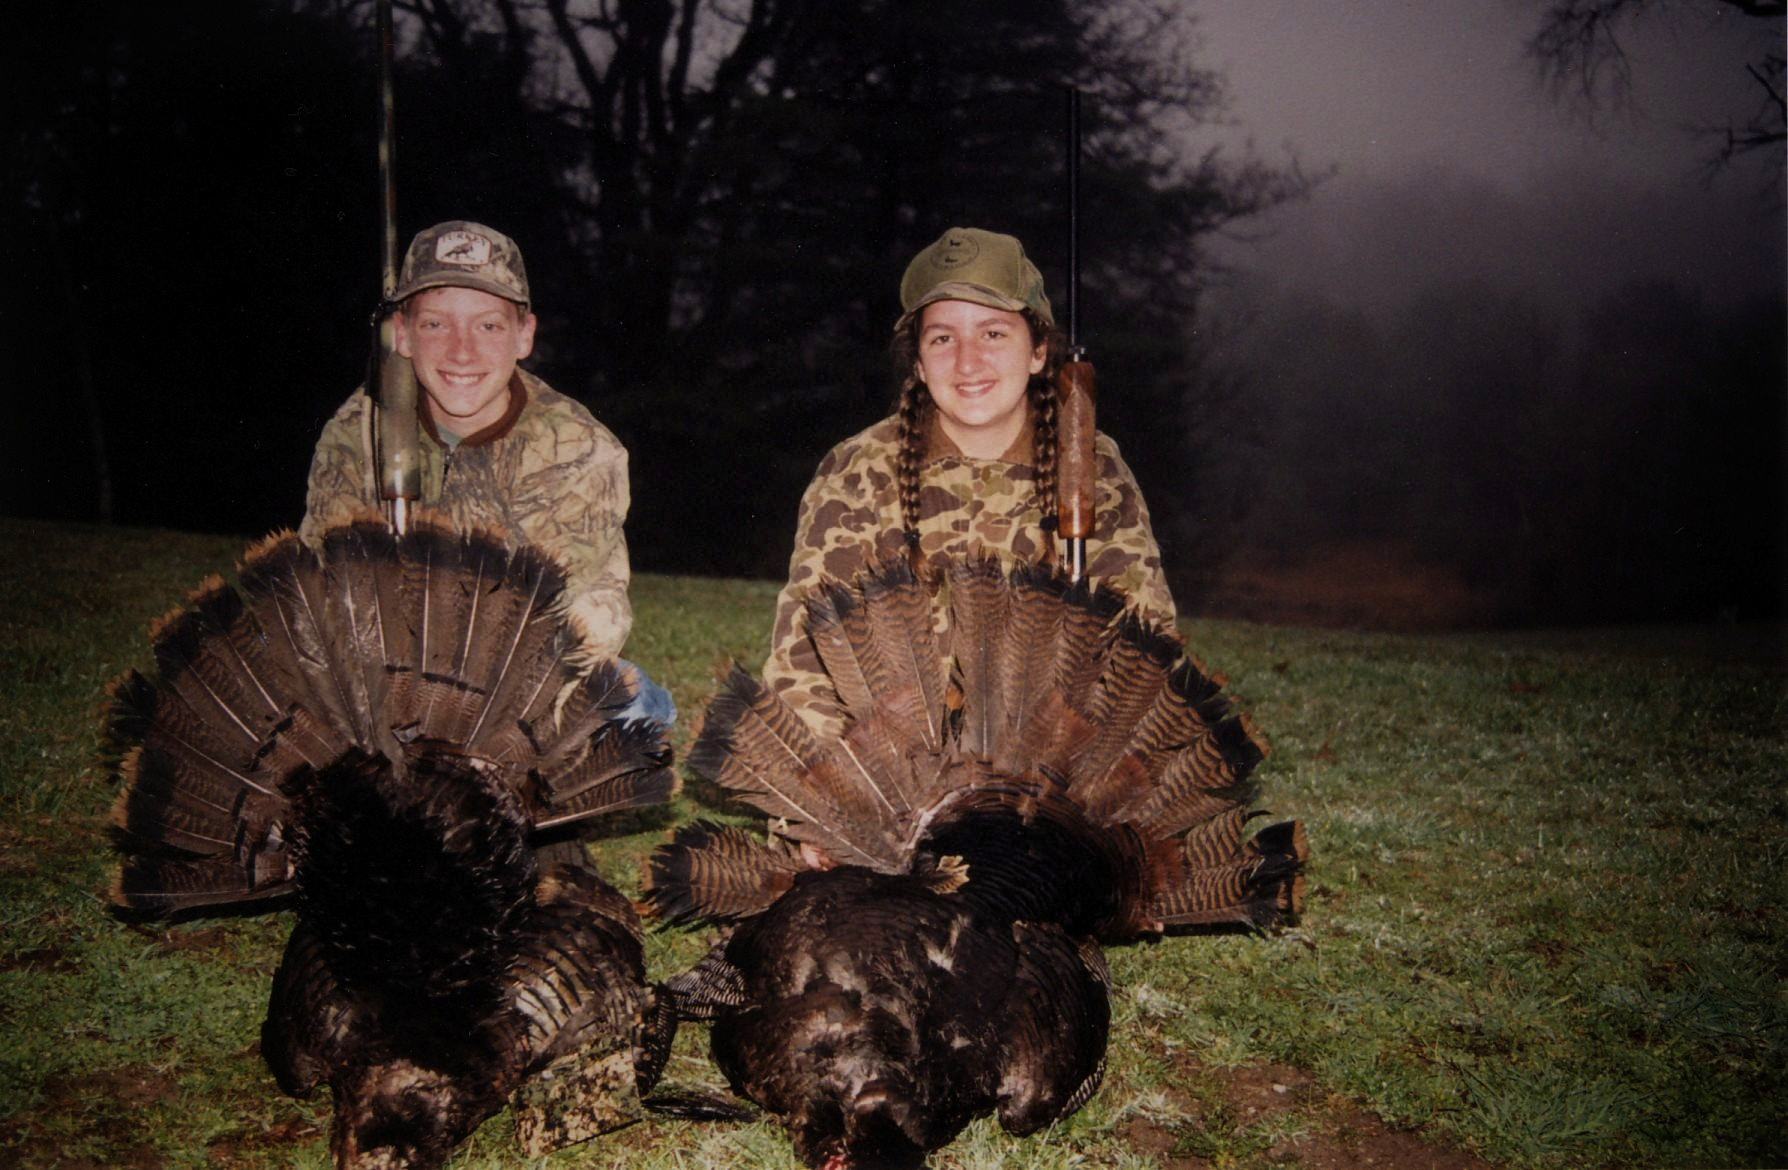 How Long Should You Hunt “Unsuccessfully” Before Giving Up?